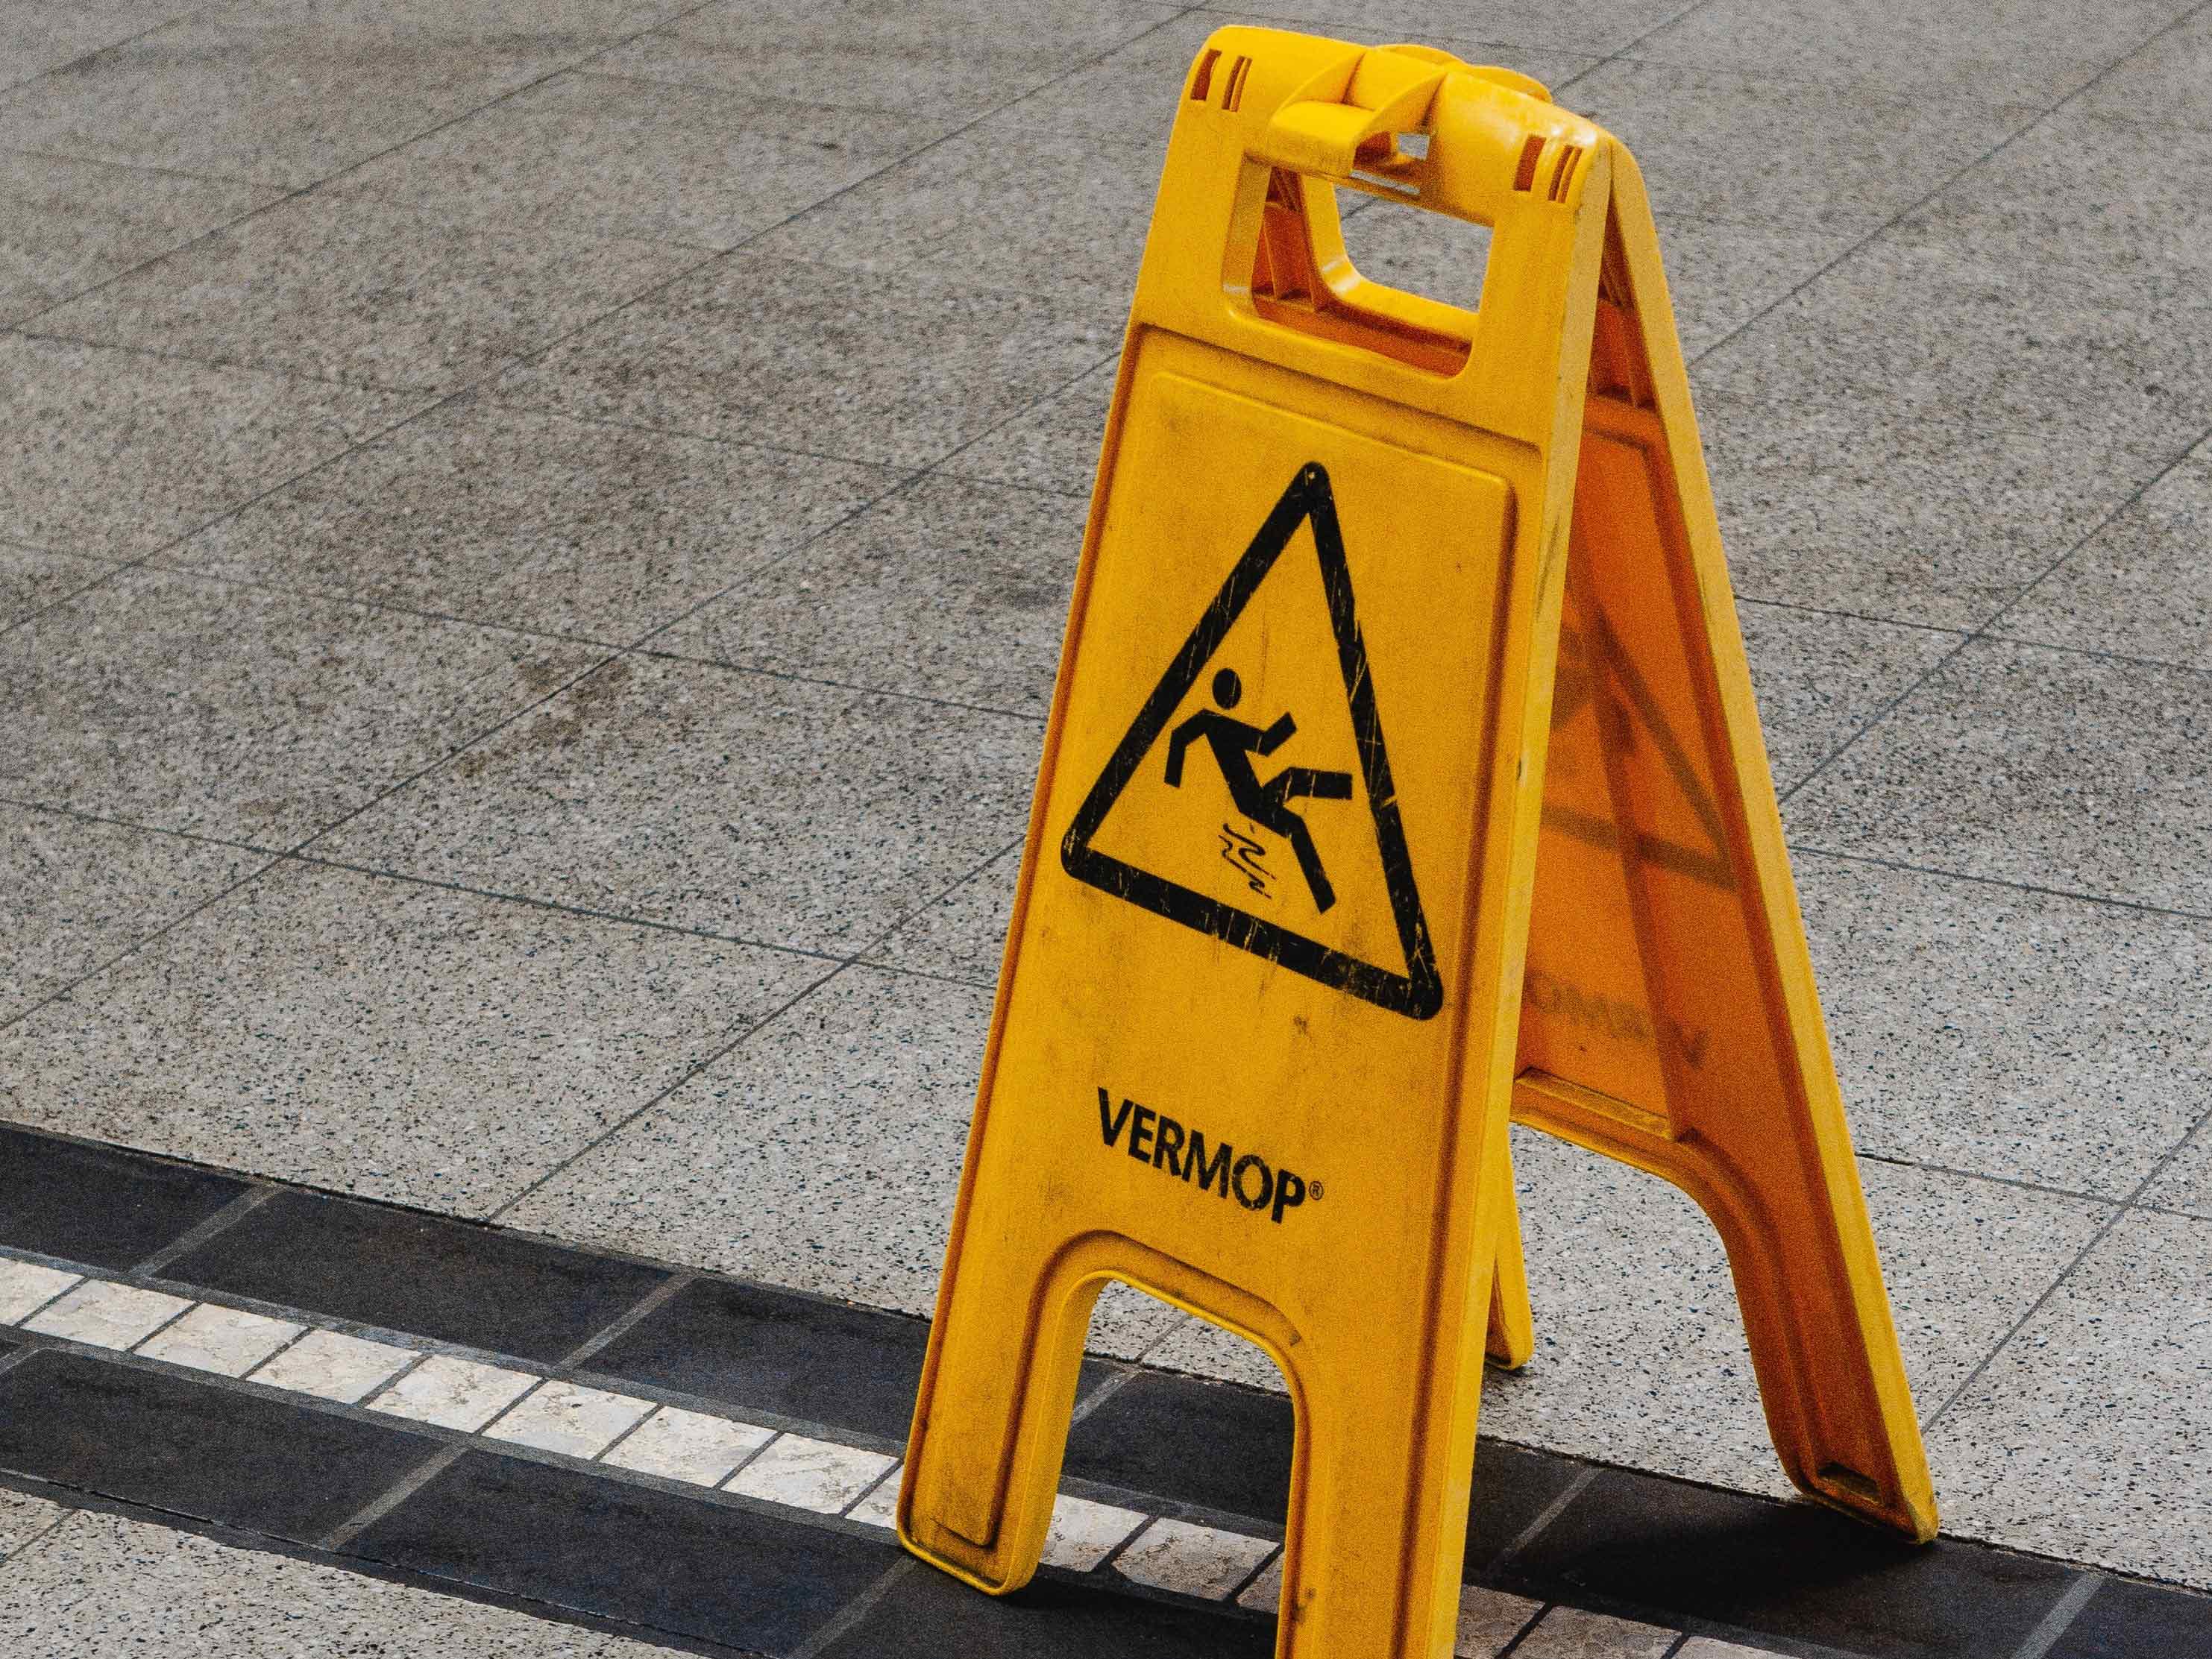 Slippery business: A slip during a work trip not compensable, says Federal Court